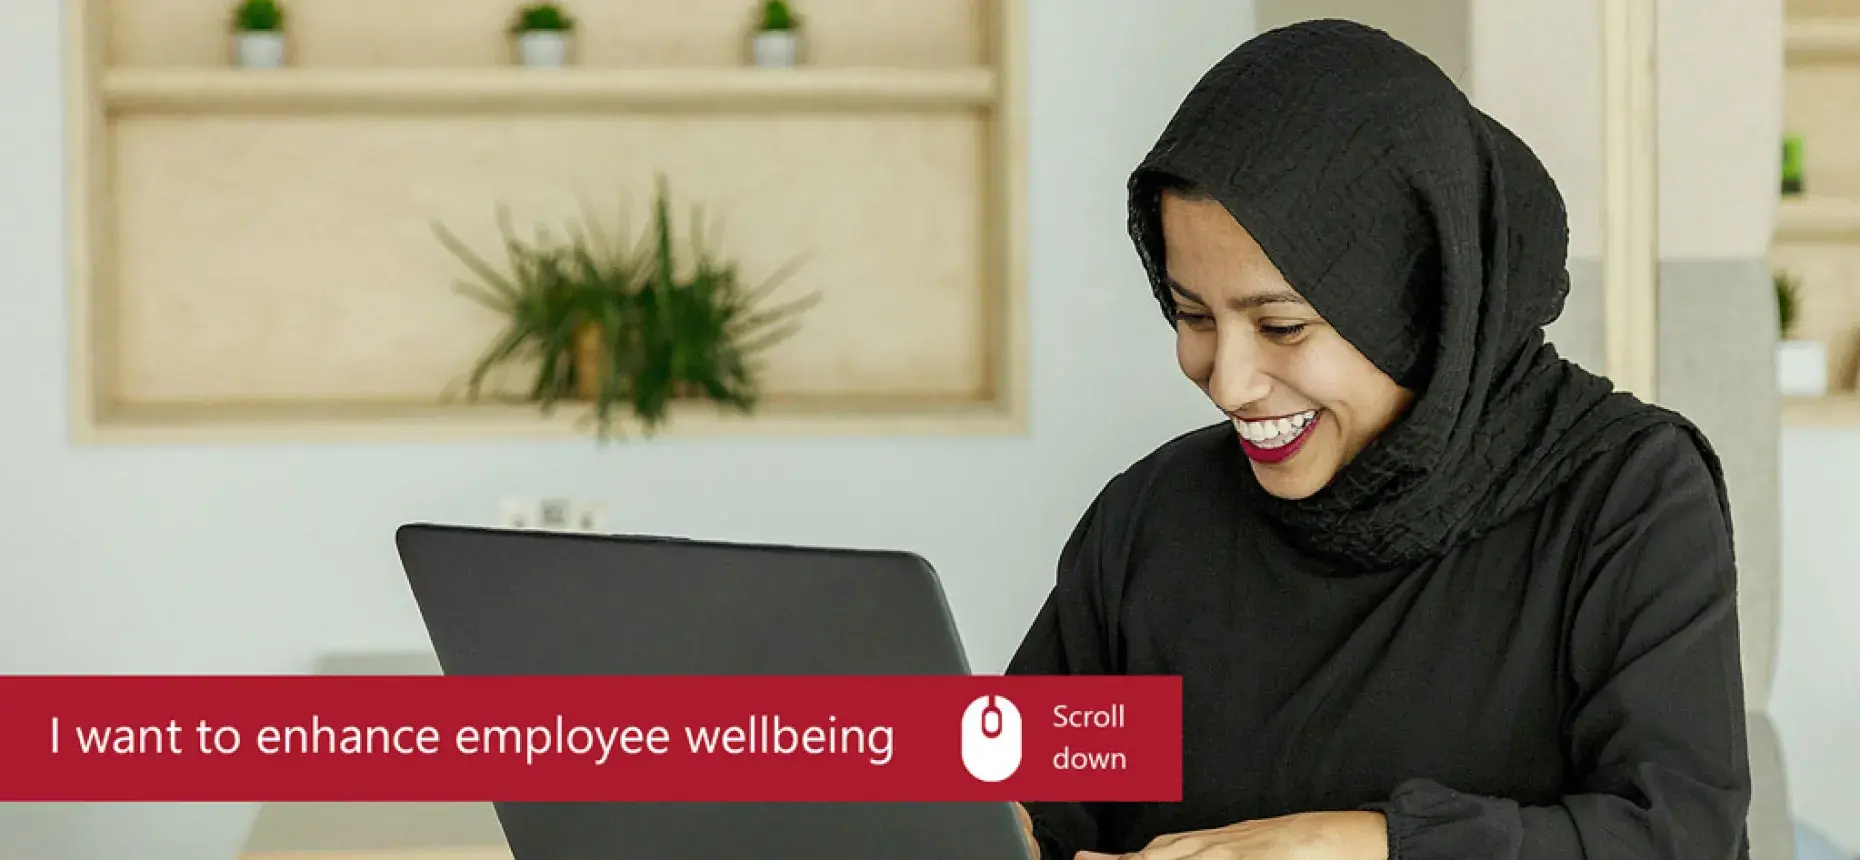 woman in hijab smiling looking at laptop